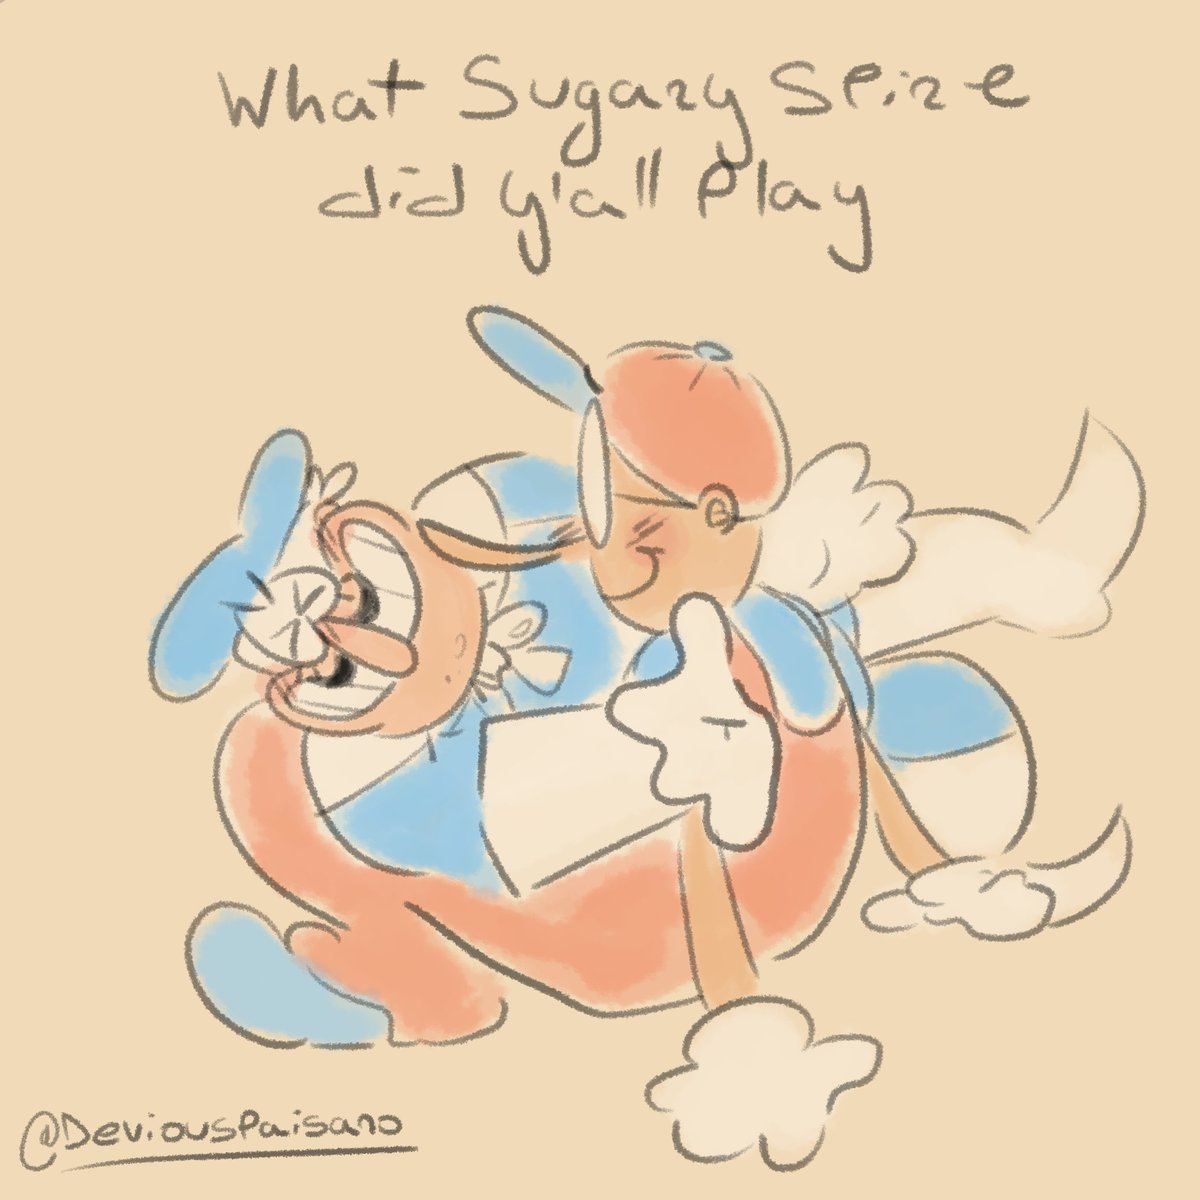 What Sugary Spire did y'all play💀💀
#sugaryspire #pizzatower